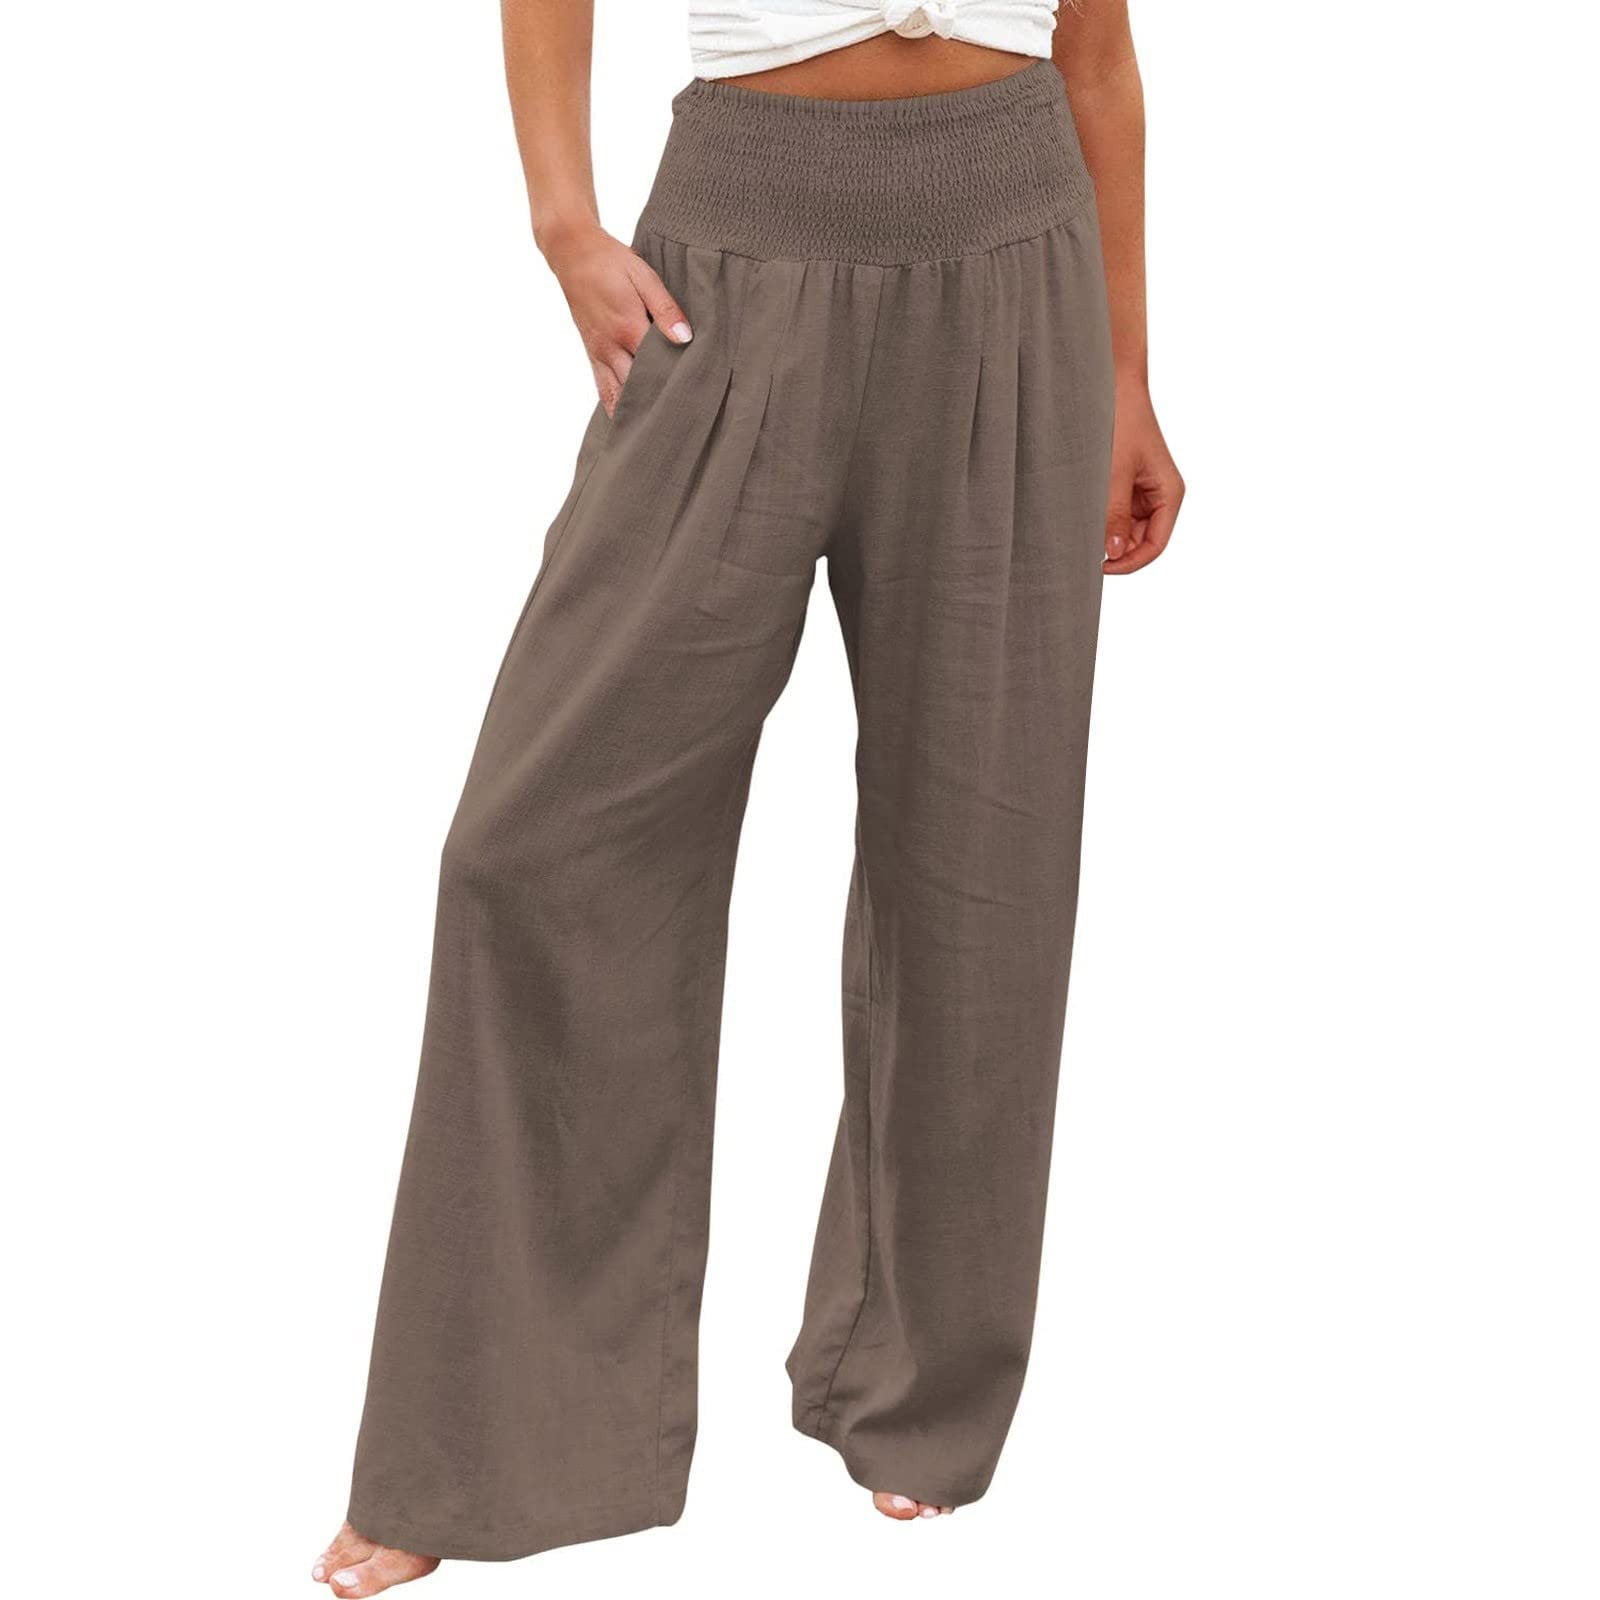 QLEICOM Women's Stretchy Wide Leg Pants Summer High Waisted Cotton Linen  Palazzo Pants Wide Leg Long Lounge Pant Trousers with Pocket Coffee XXL, US  Size 12 